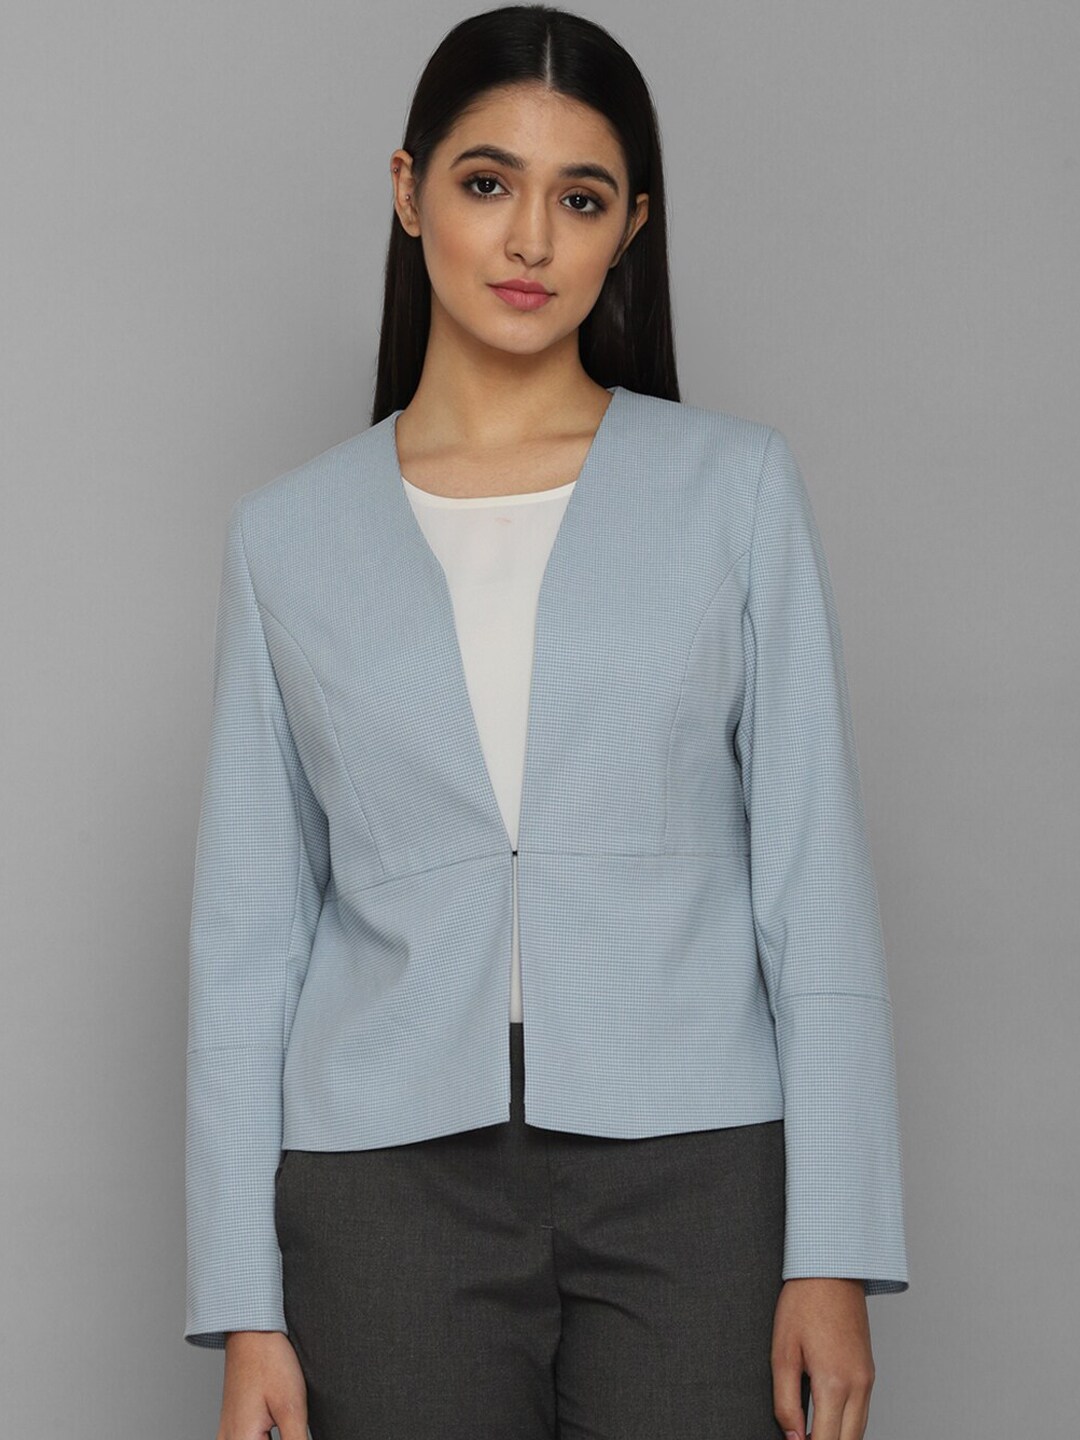 Allen Solly Woman Blue Checked Single Breasted Casual Blazer Price in India